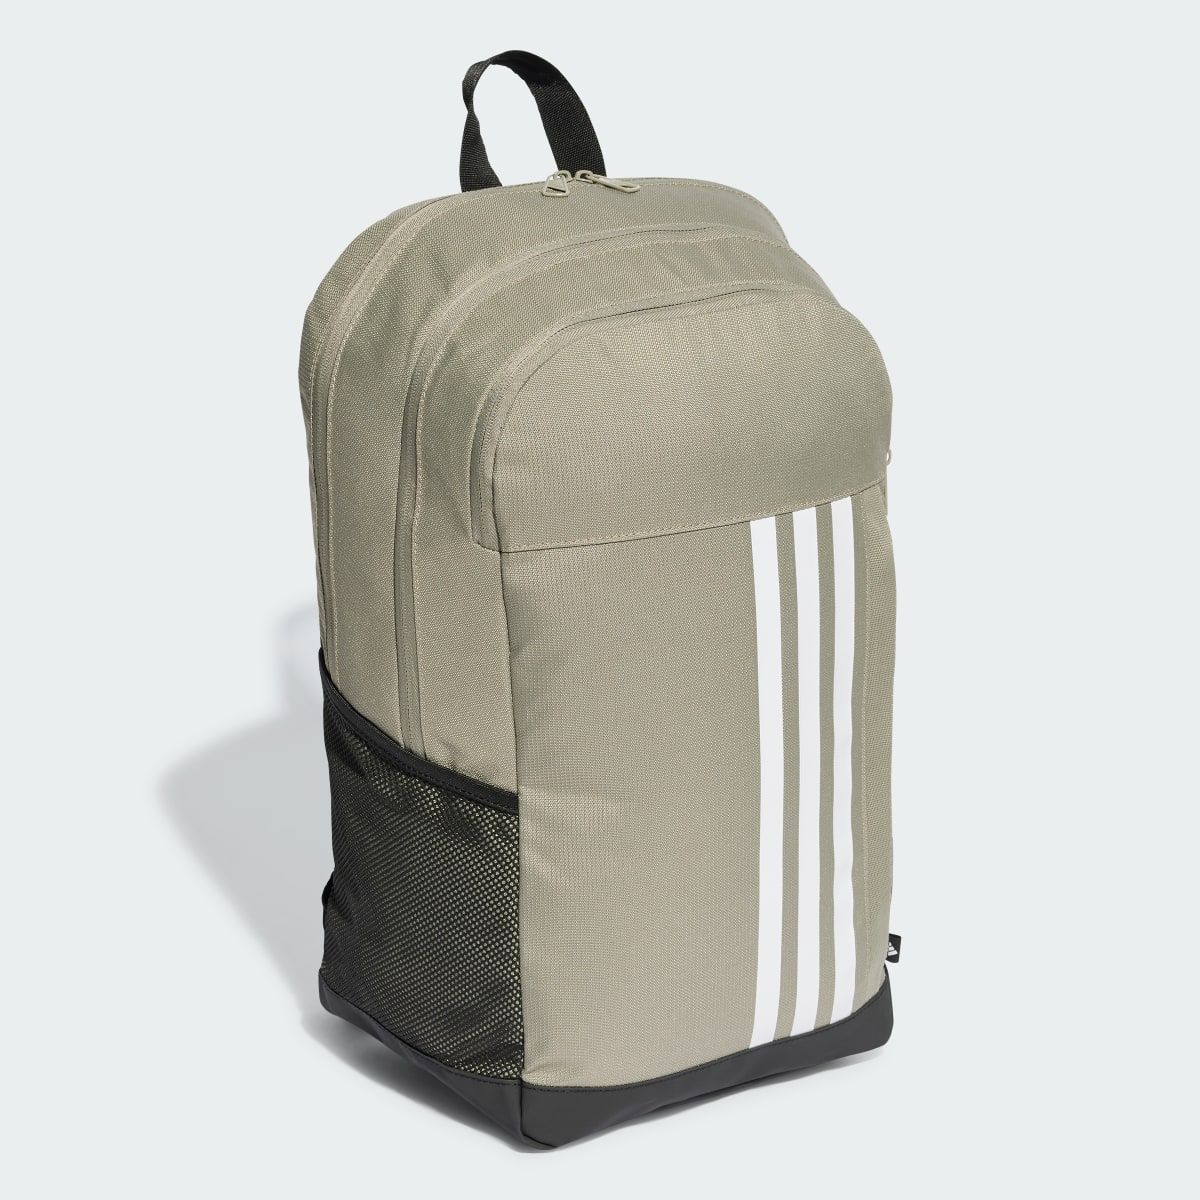 Adidas Motion 3-Stripes Backpack. 4